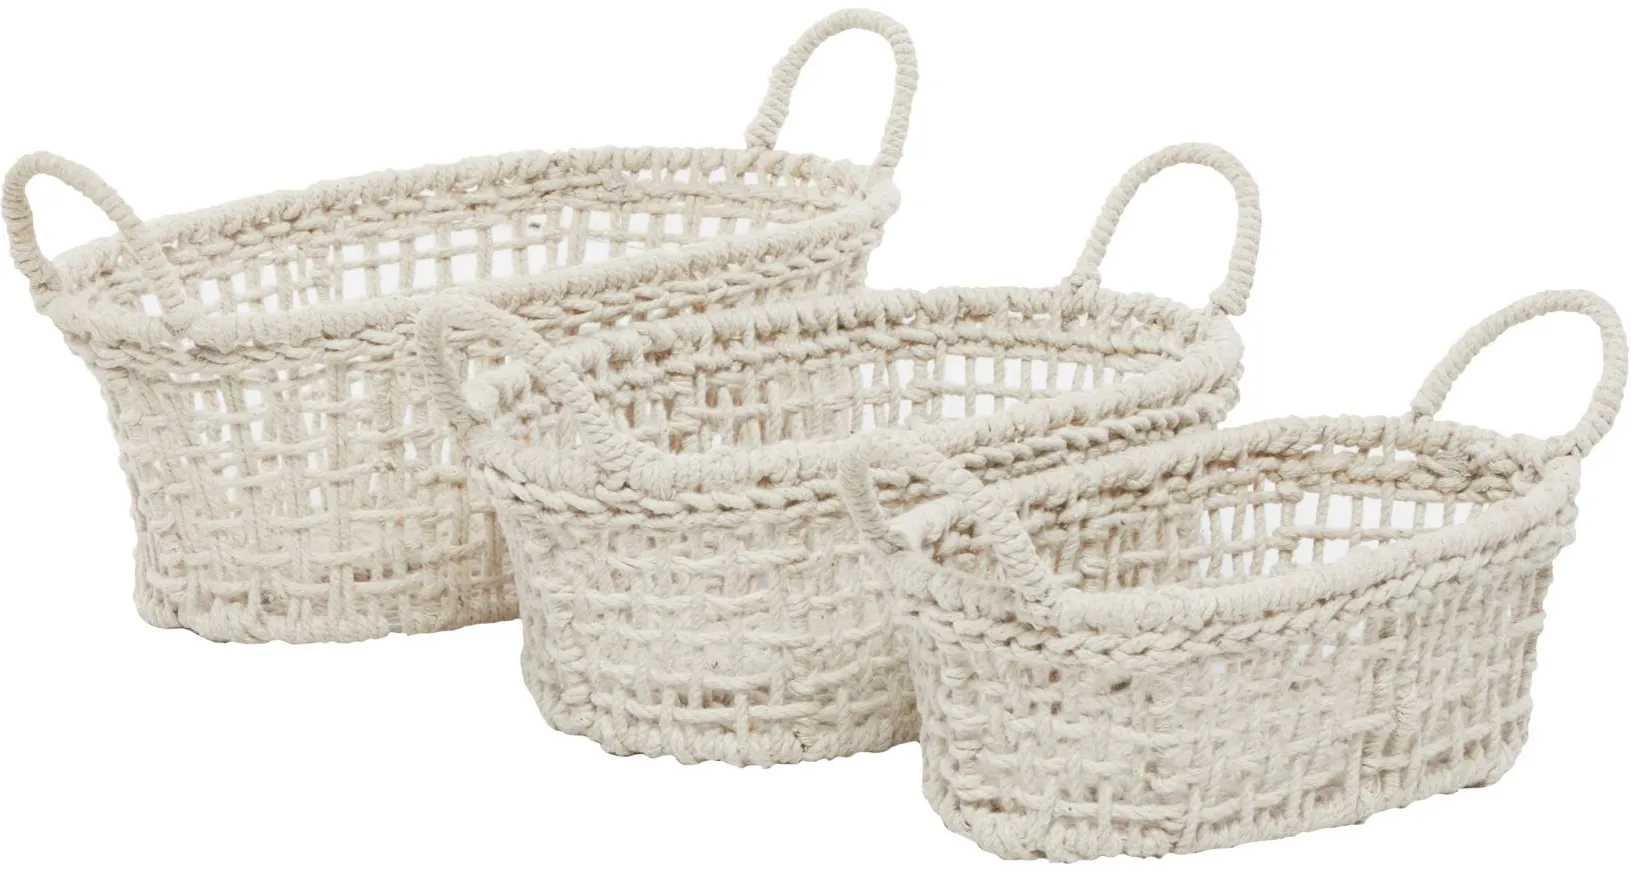 Ivy Collection Cotton Storage Baskets - Set of 3 in White by UMA Enterprises